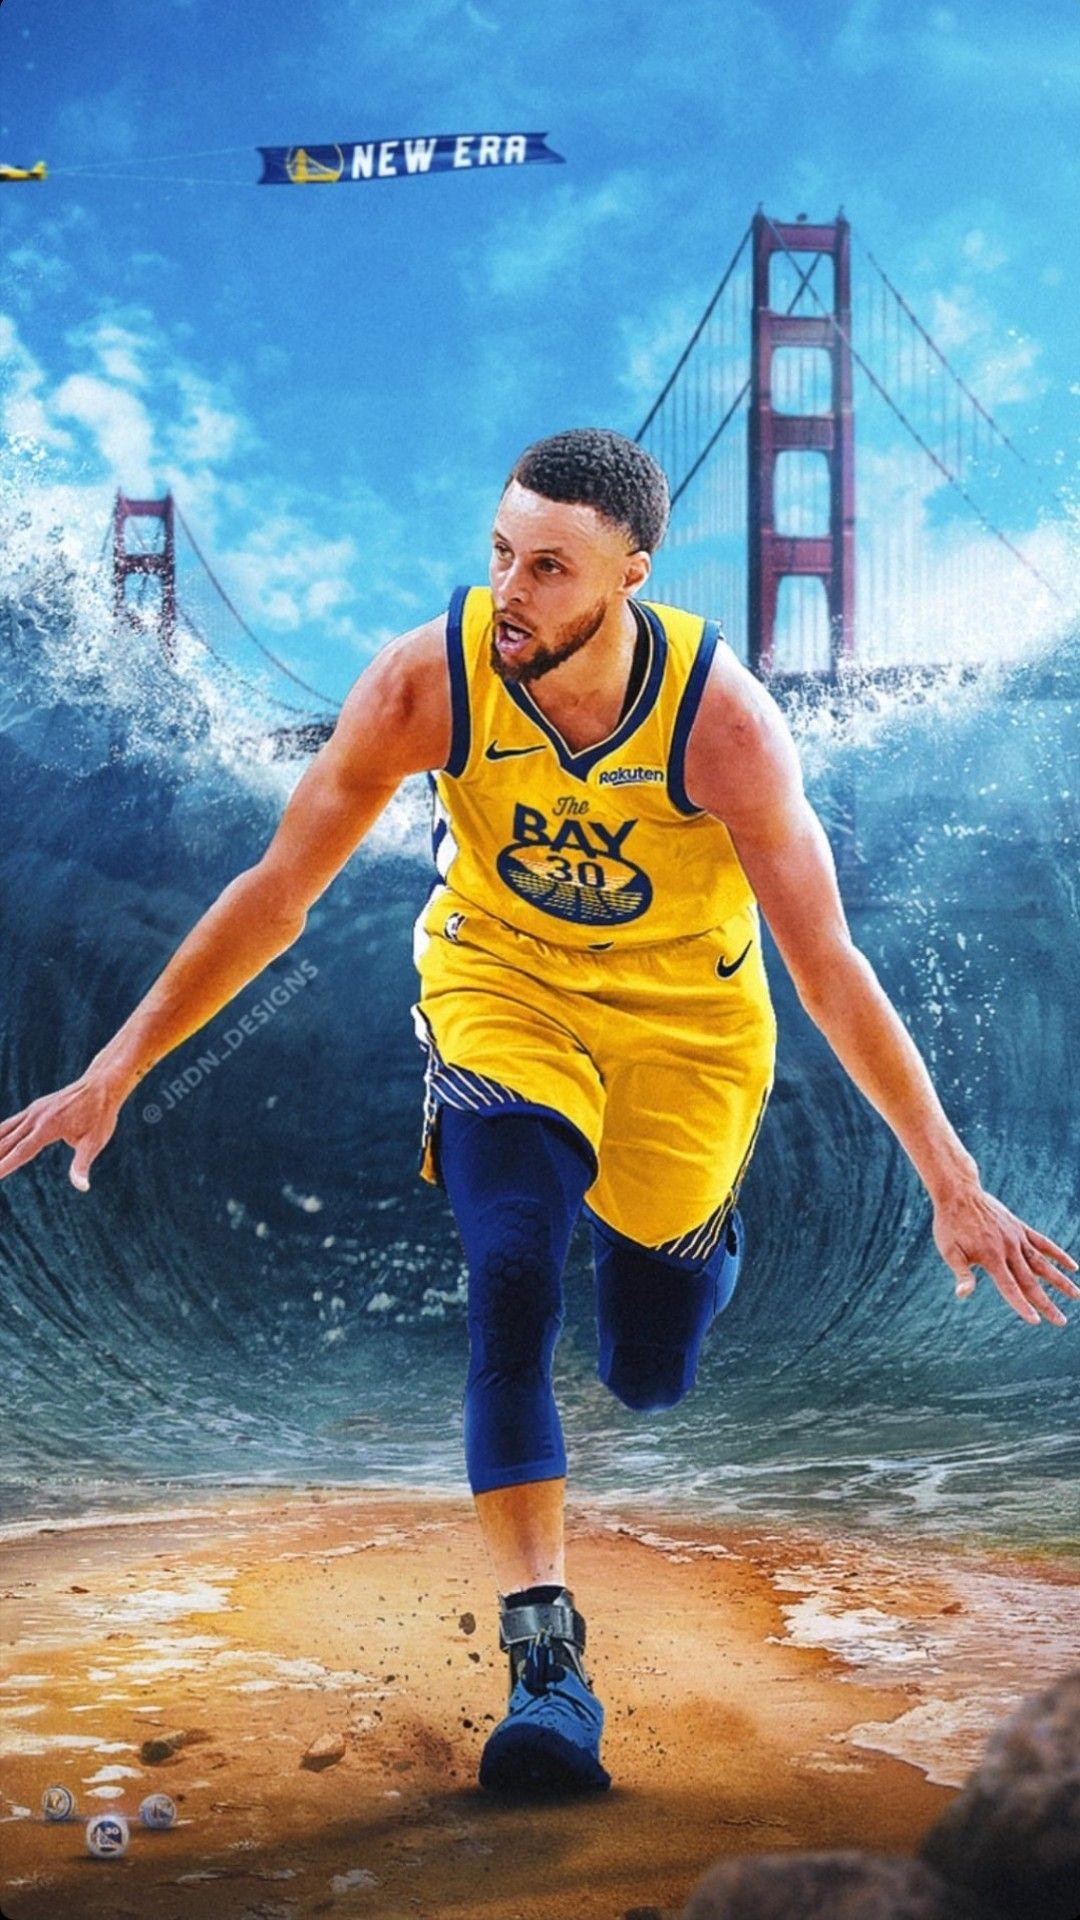 Basketball Steph Curry Wallpapers - Wallpaper Cave